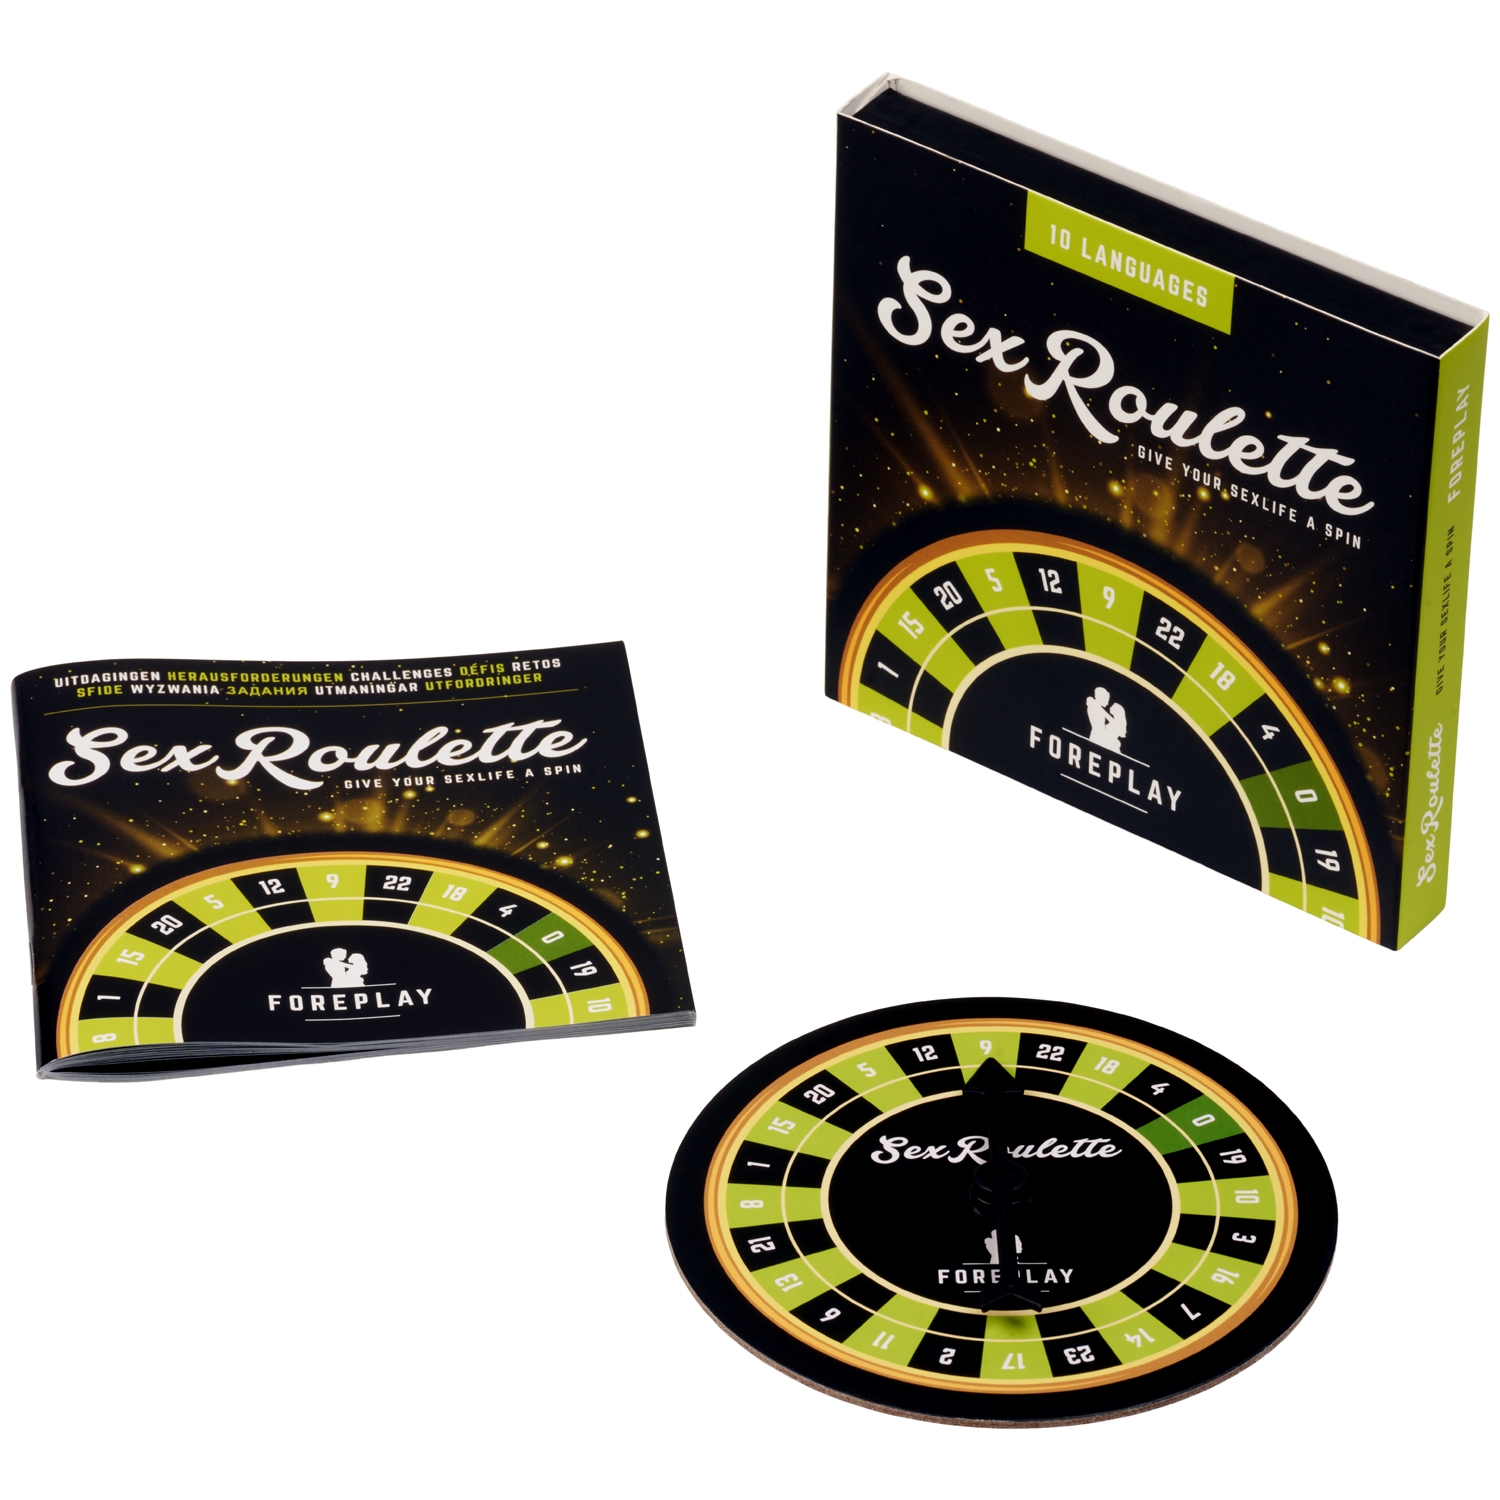 #3 - Tease & Please Sex Roulette Foreplay Spil      - Black